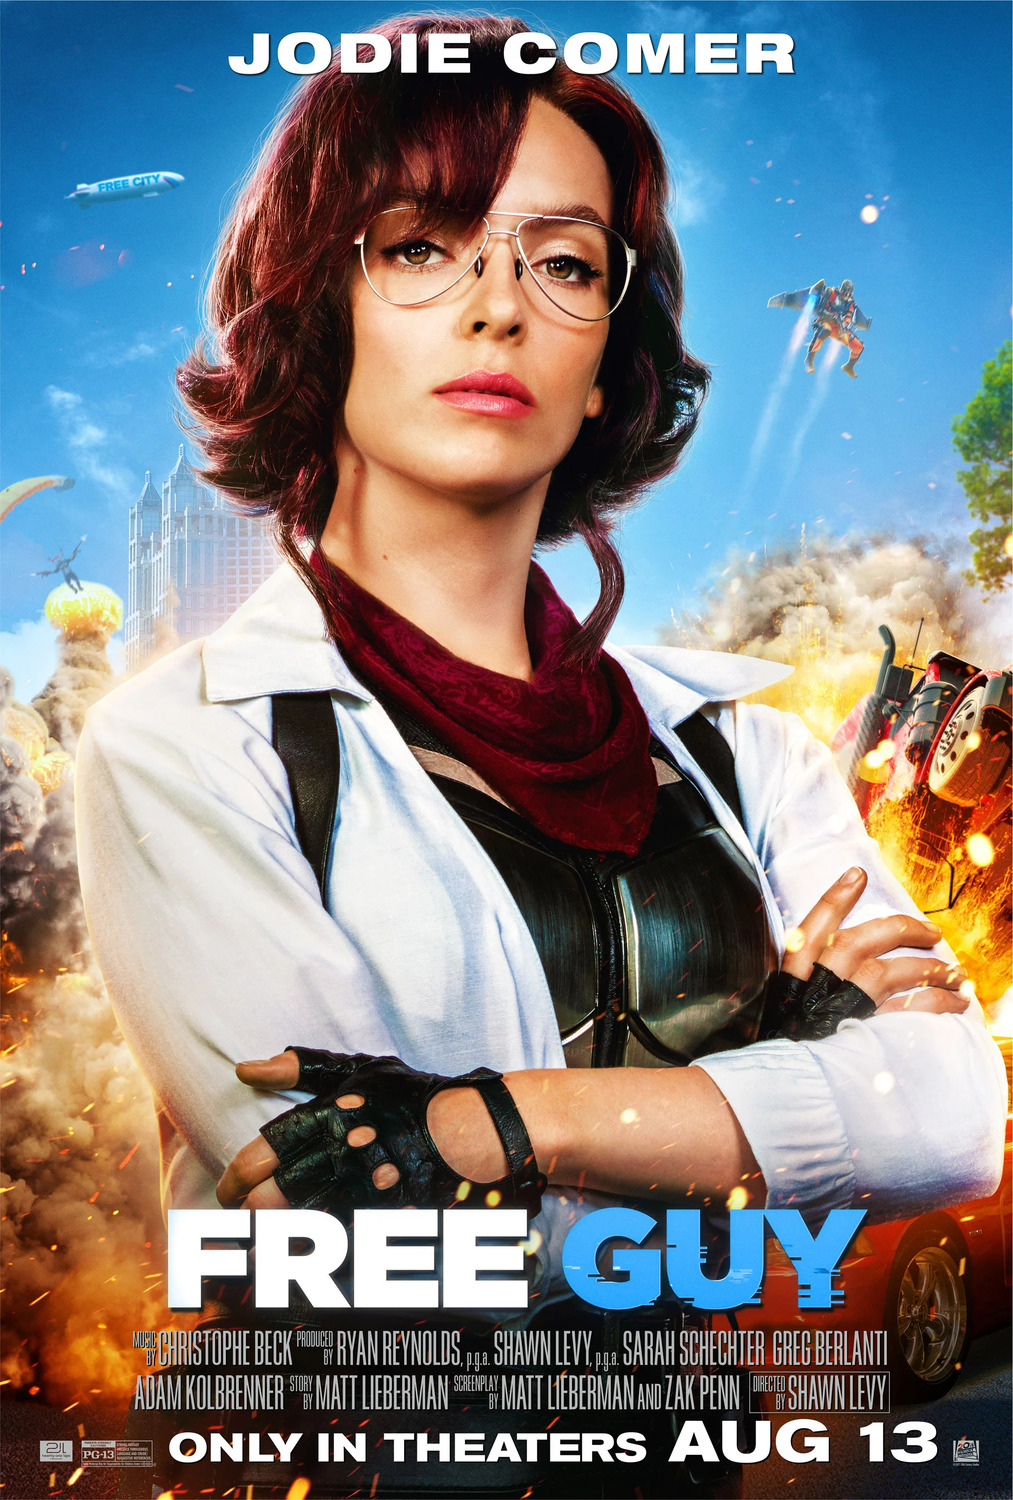 Extra Large Movie Poster Image for Free Guy (#8 of 16)